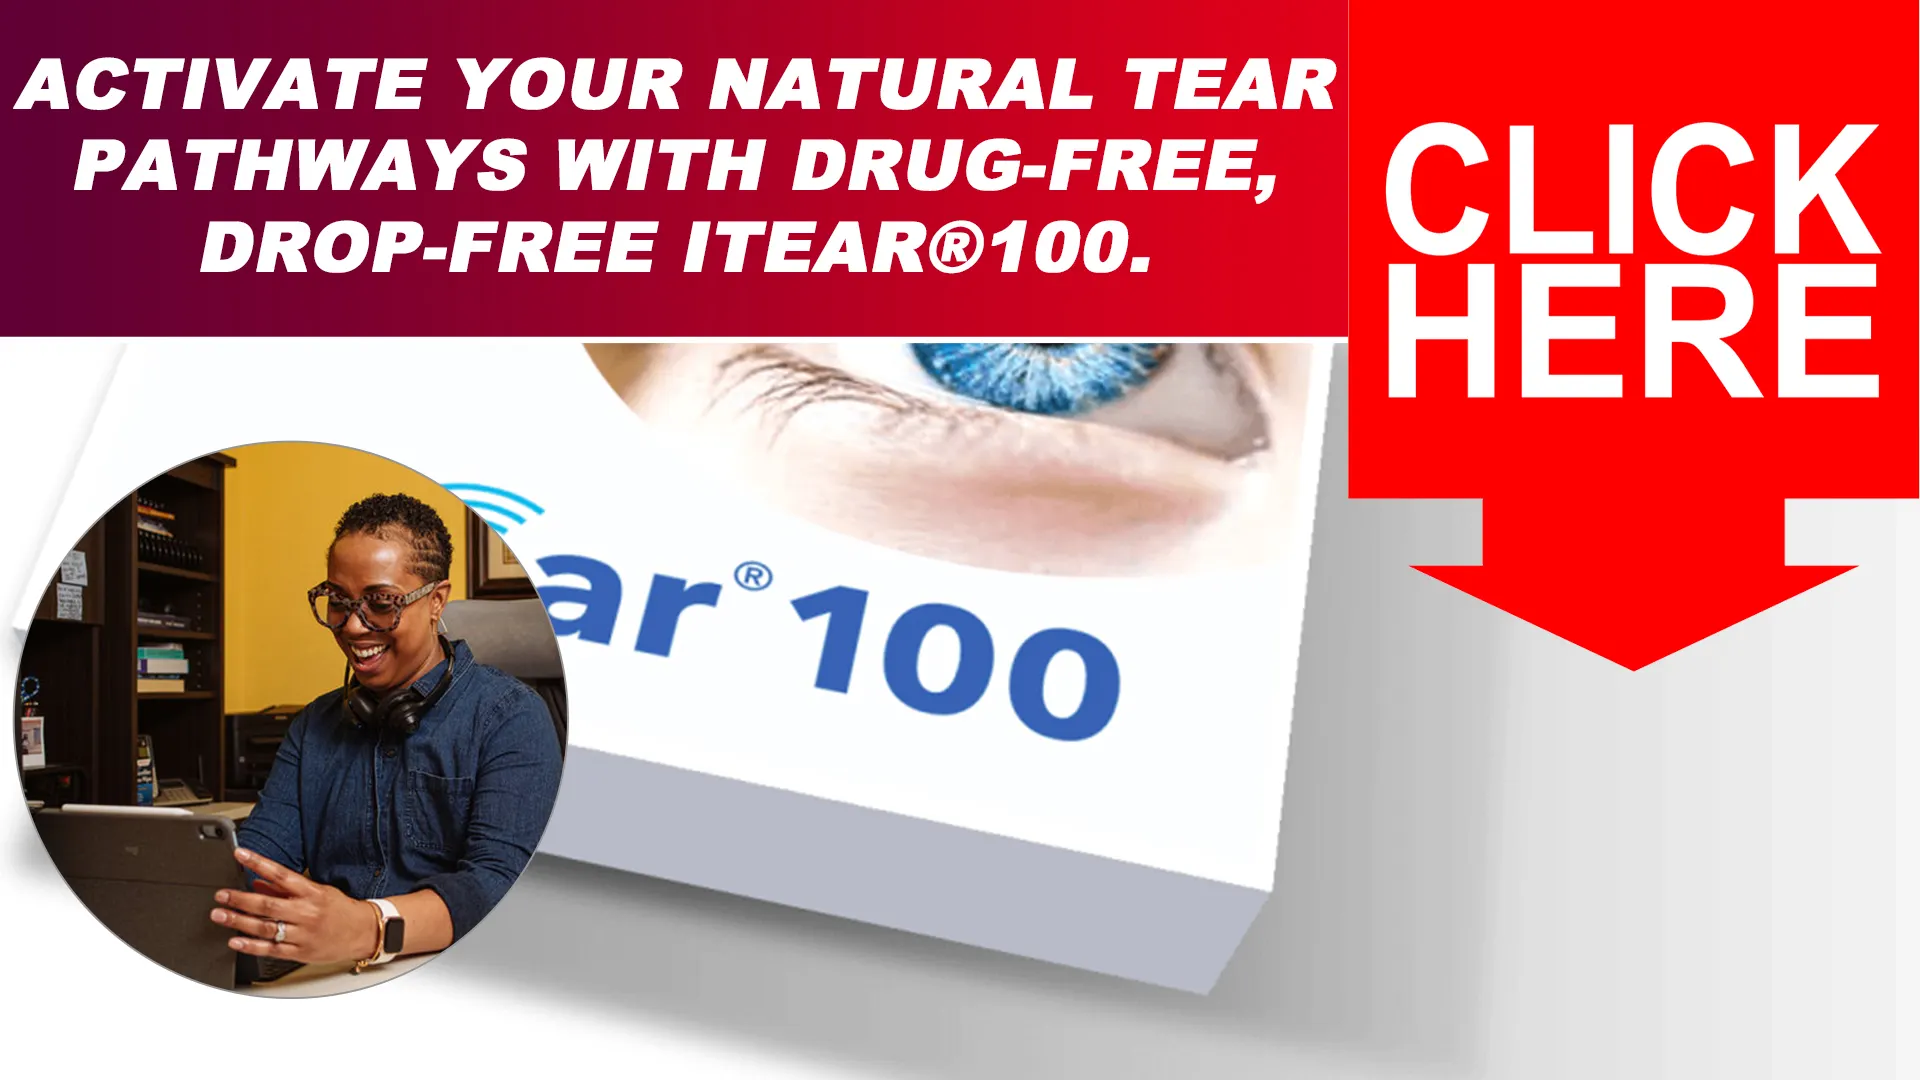 Examining the Benefits of the iTEAR100 for Seasonal Dry Eye